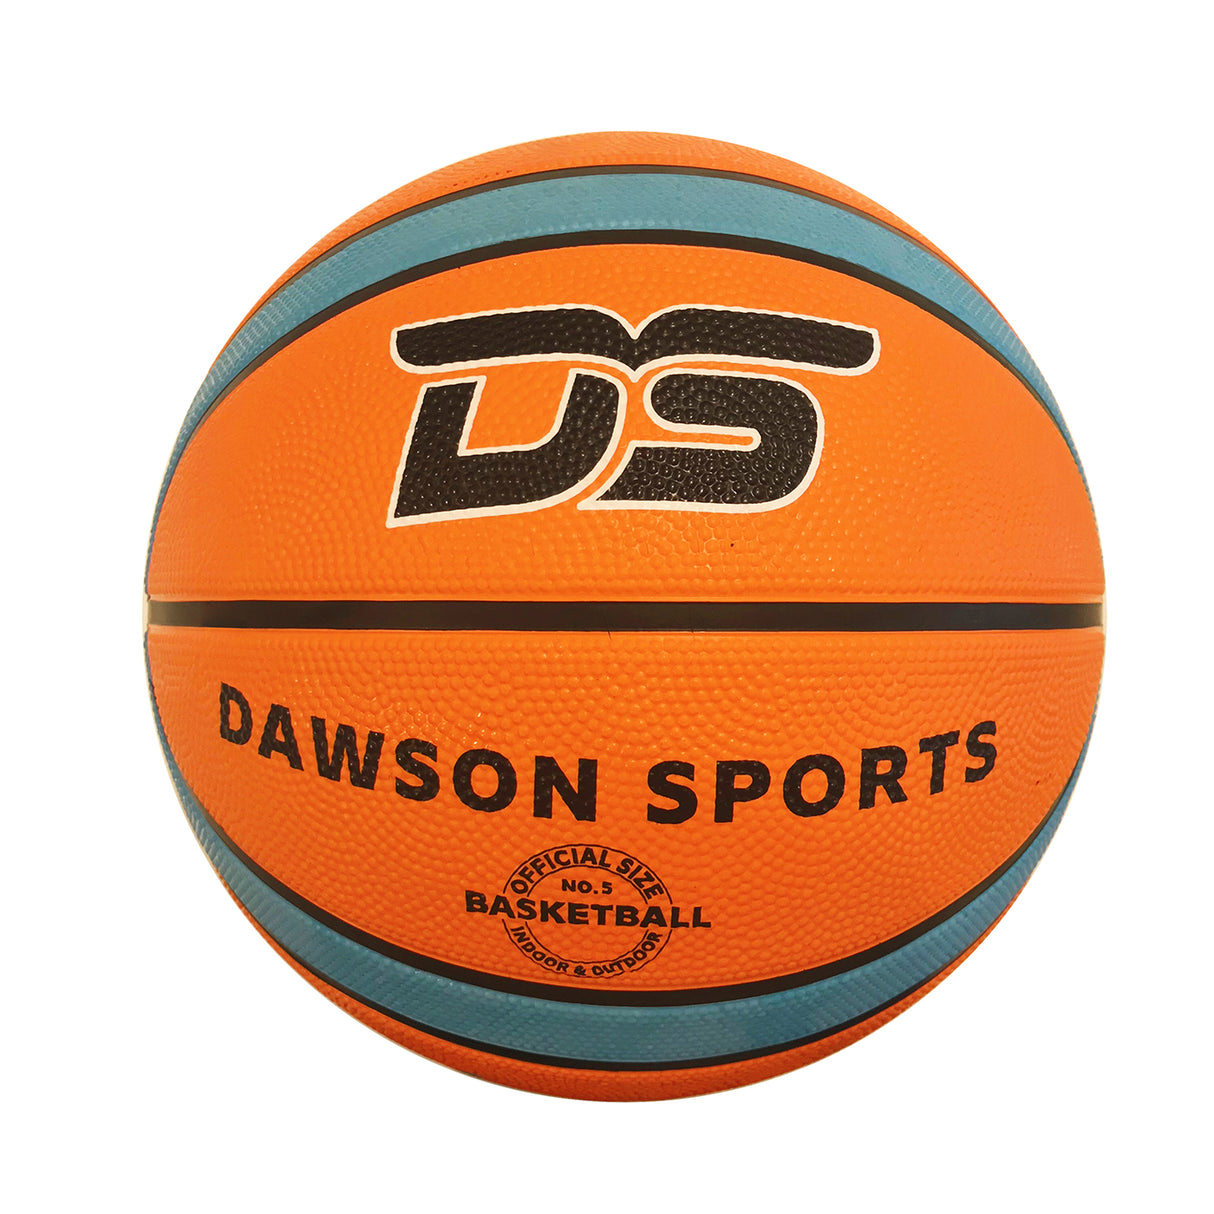 DS Rubber Basketball (4 sizes available)